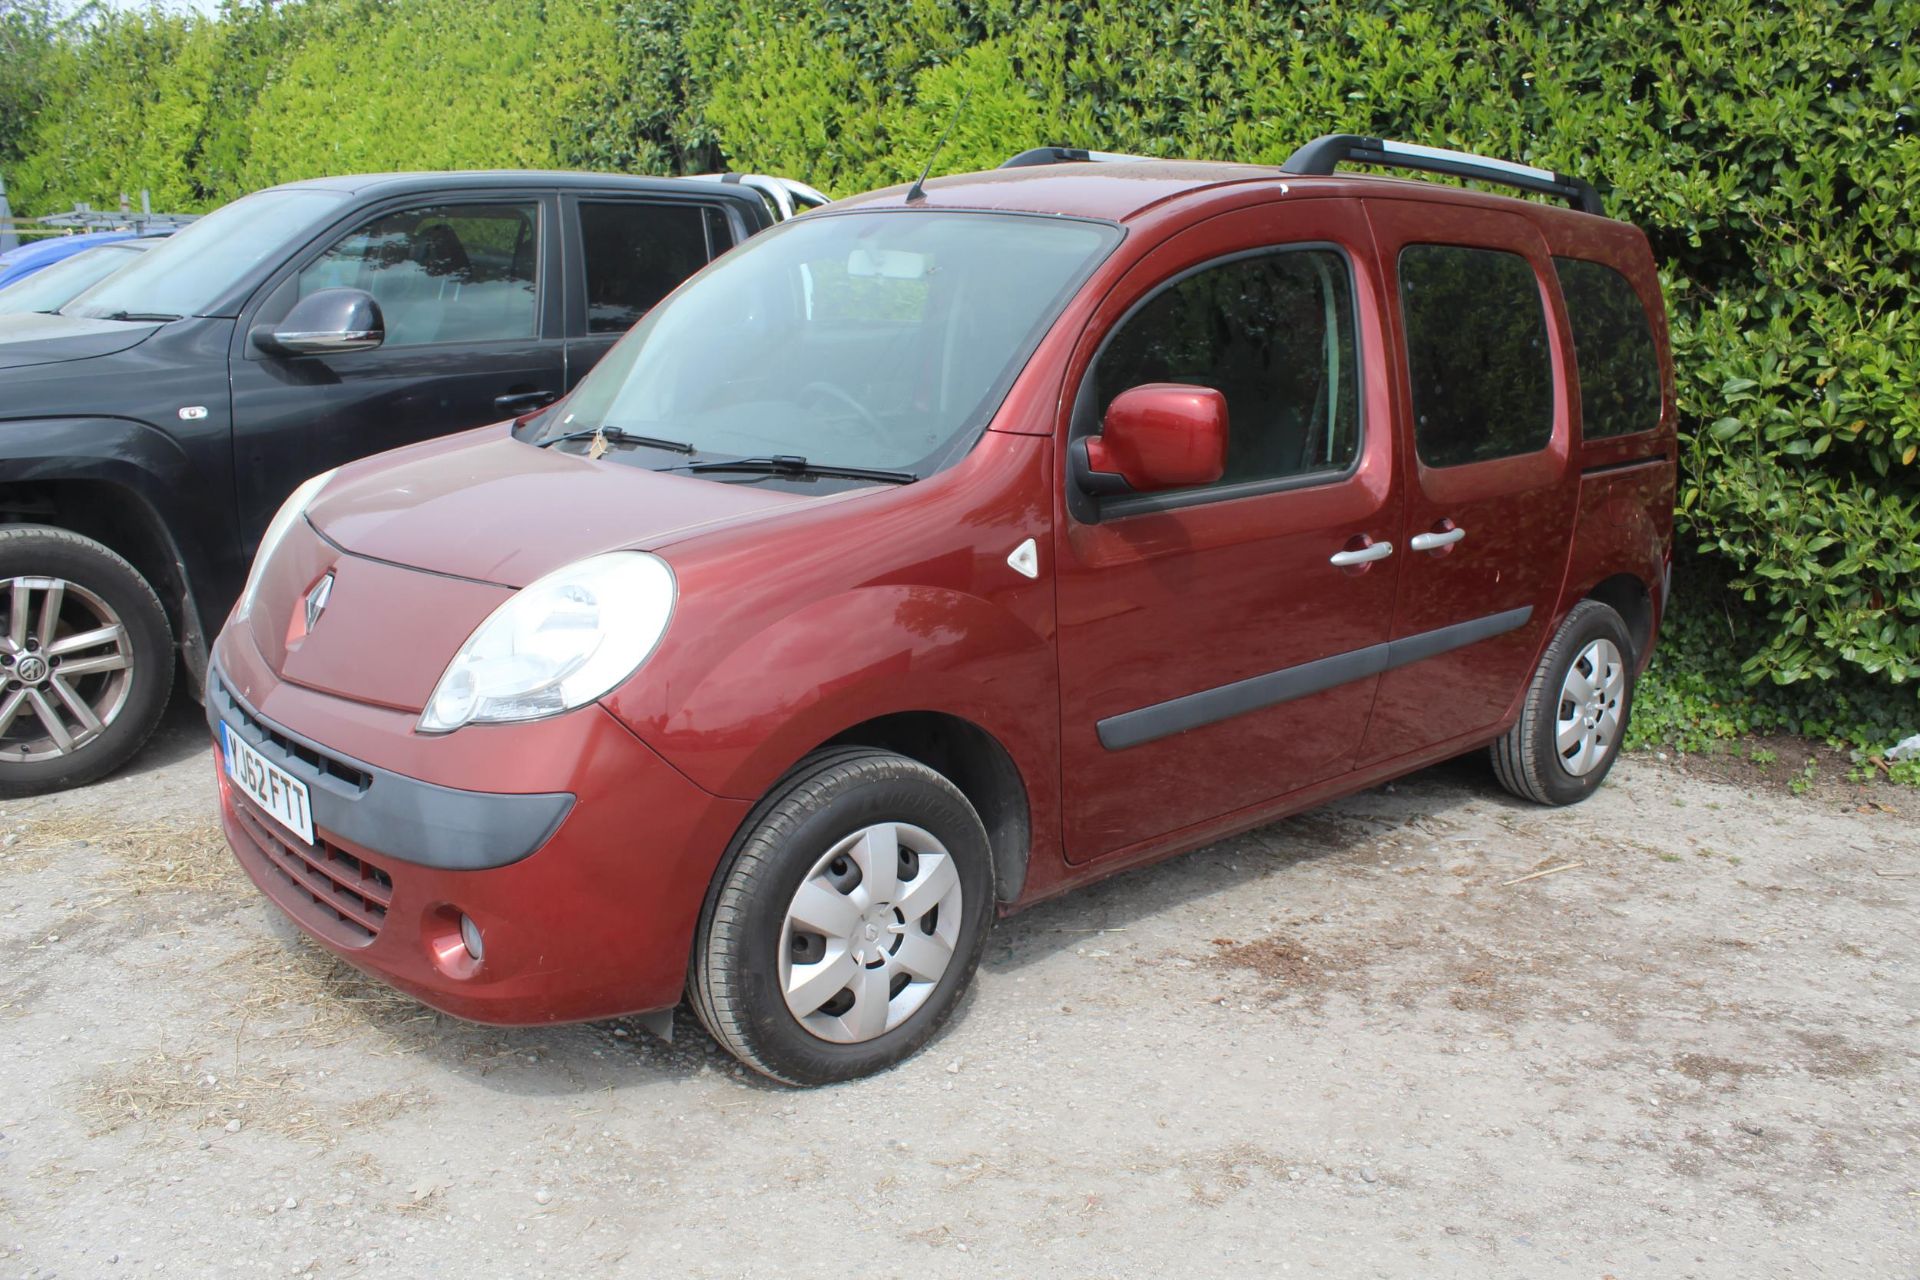 A RED 5DR RENULT KANGOO 16V PETROL AUTO EXPRESSION, FIRST REGISTERED IN SEPTEMBER 2012 WITH AN MOT - Image 2 of 3